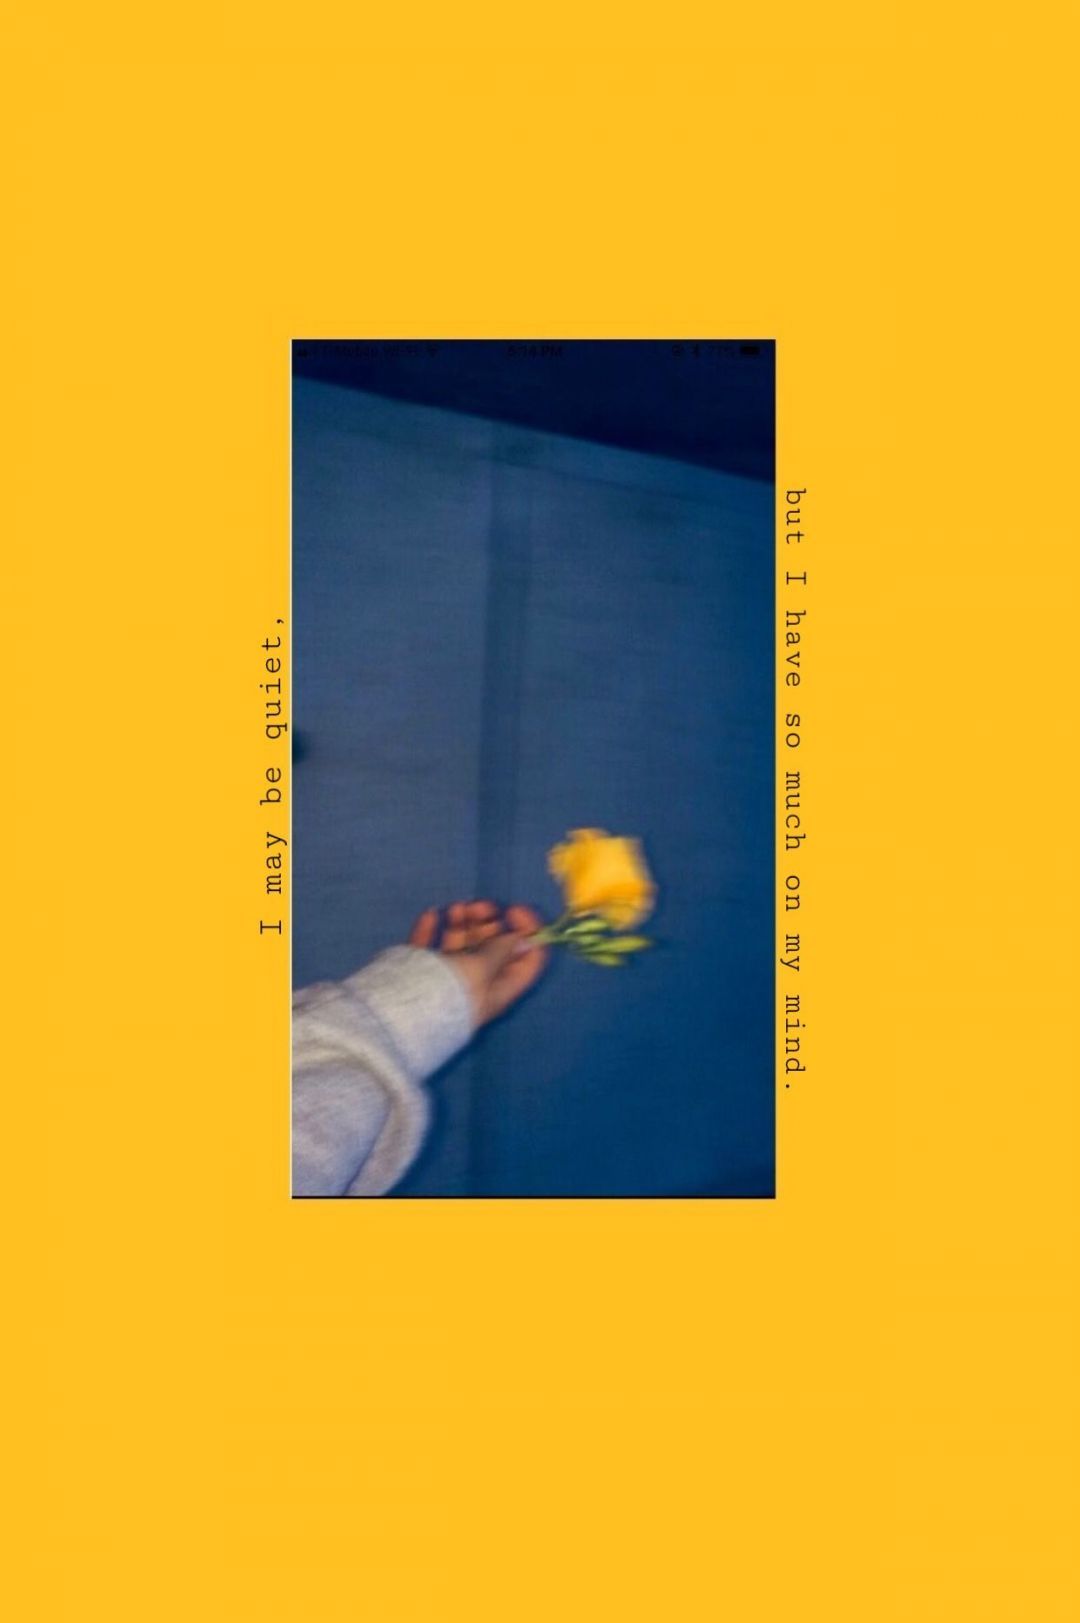 Aesthetic phone wallpaper of a yellow rose being held by a hand - Yellow